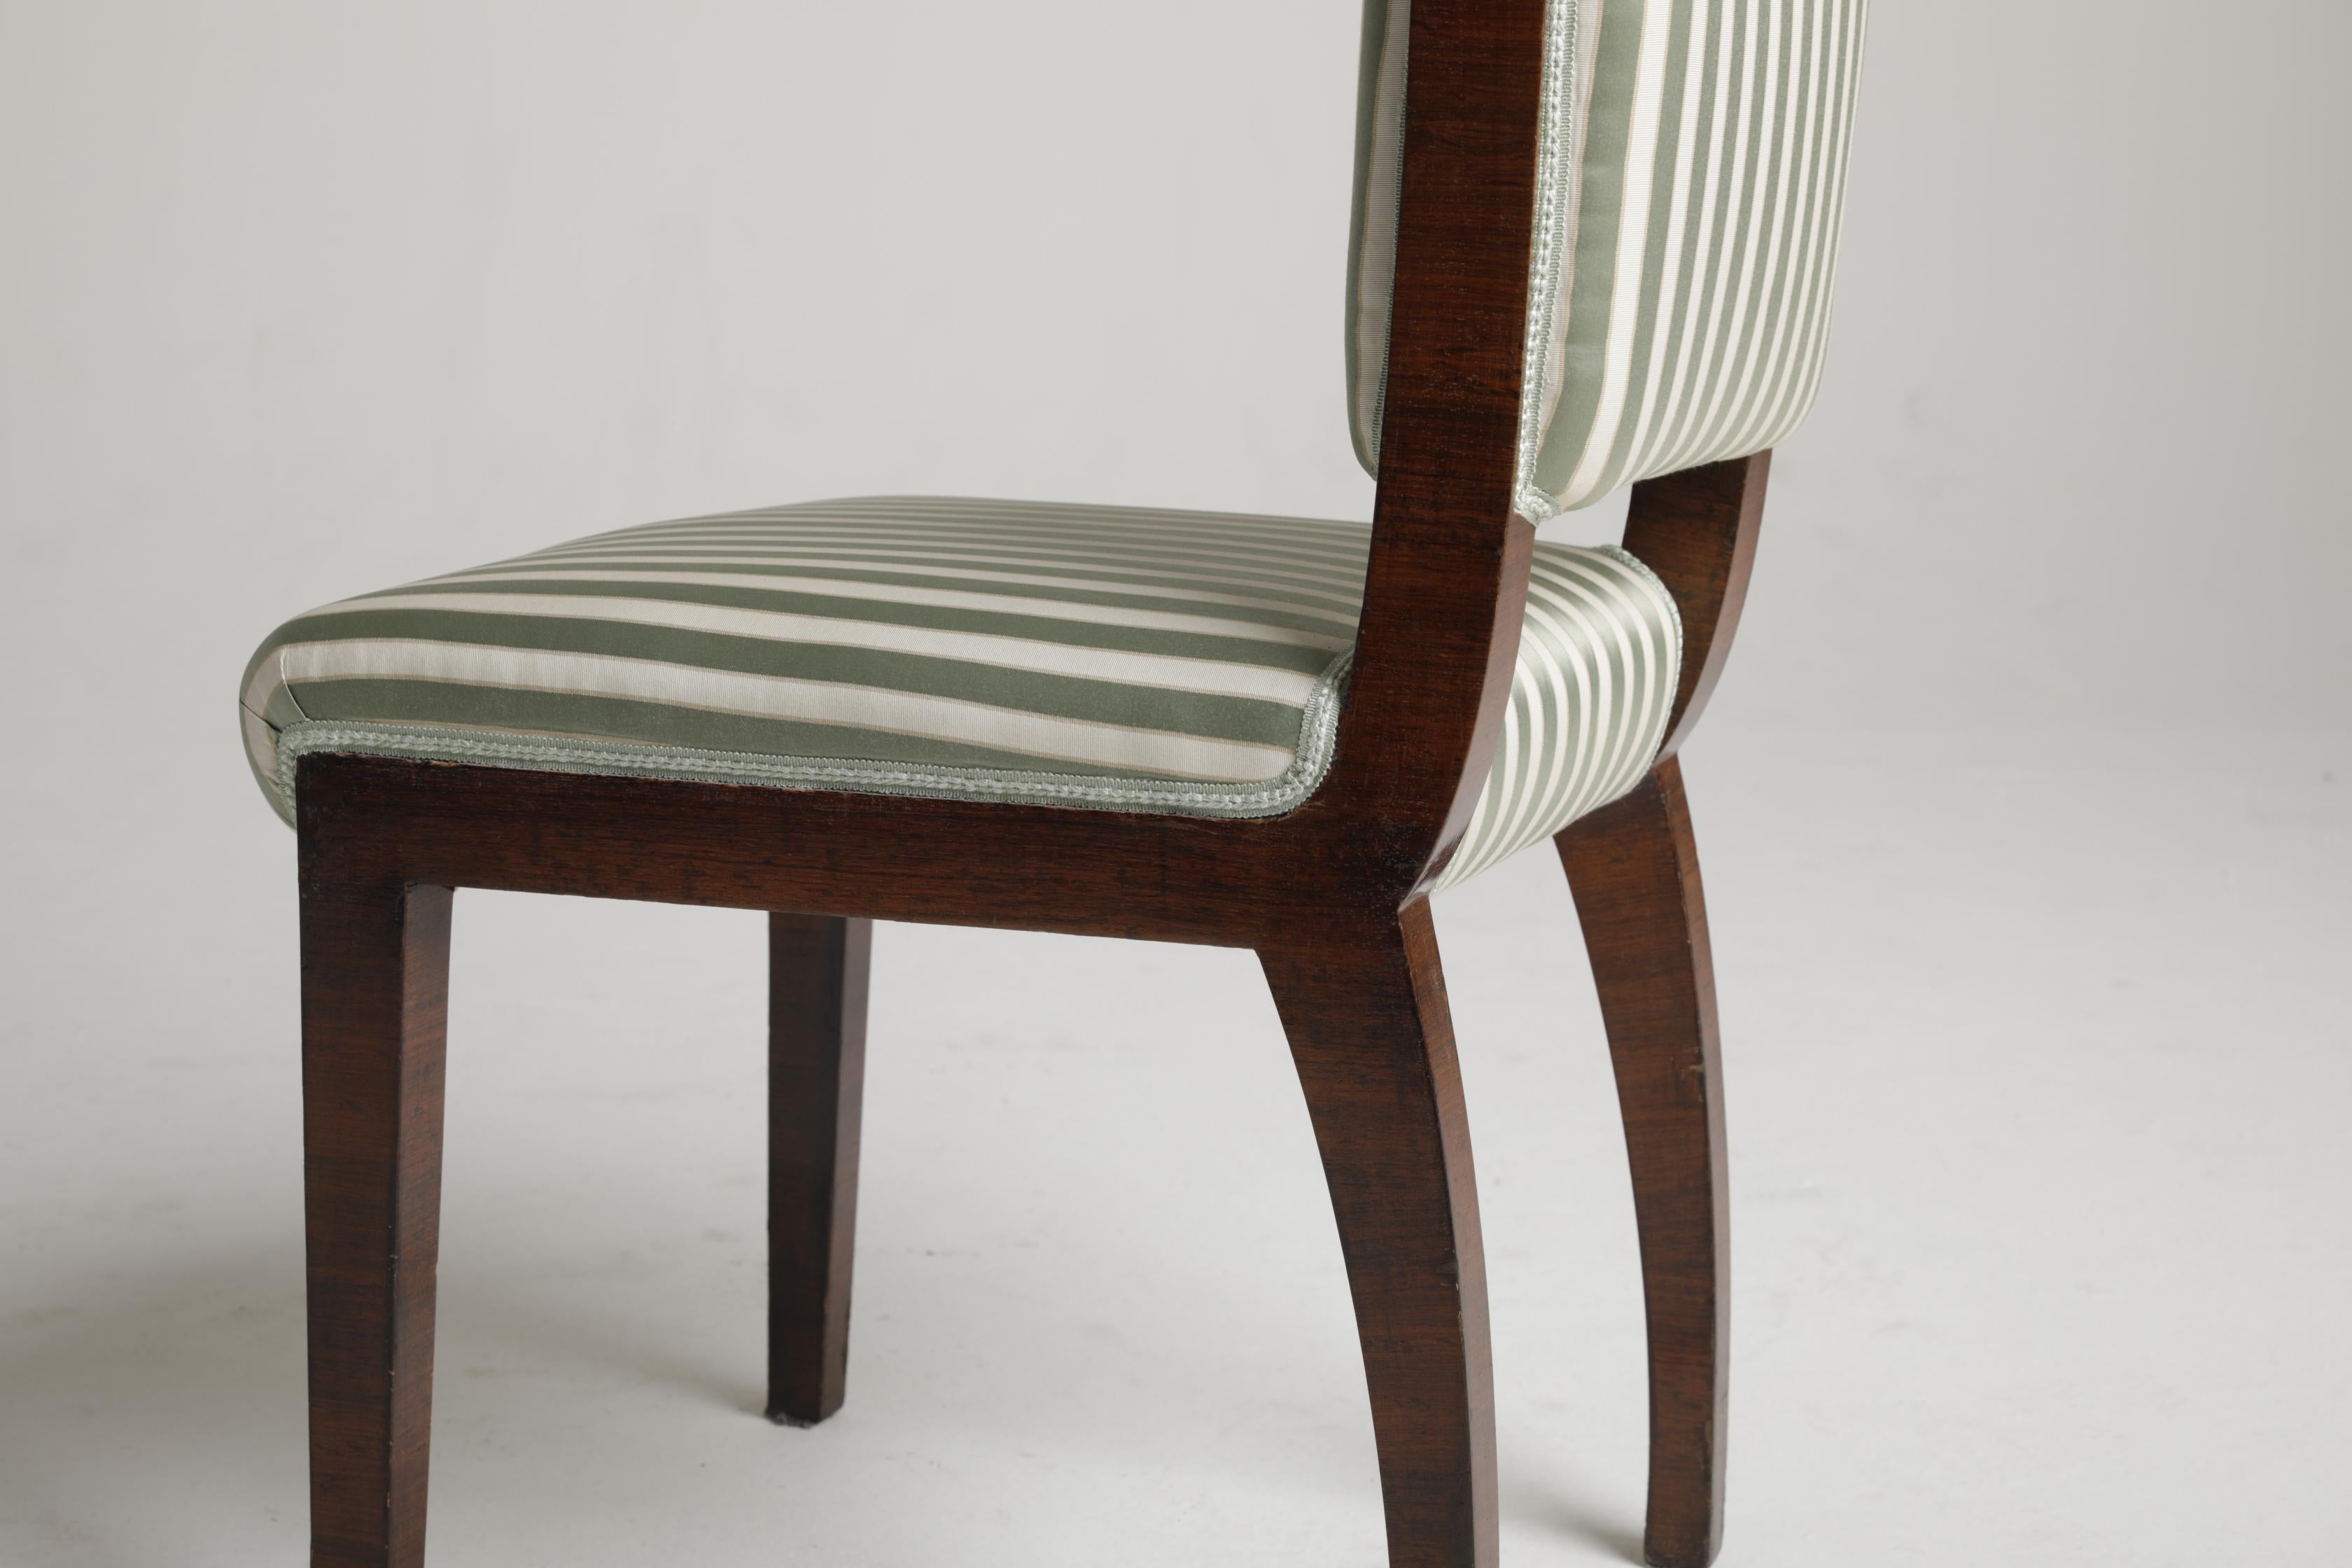 Set of 4 Italian Art Déco Chairs, Melchiorre Bega (Attr.), Italy, 1930s For Sale 1